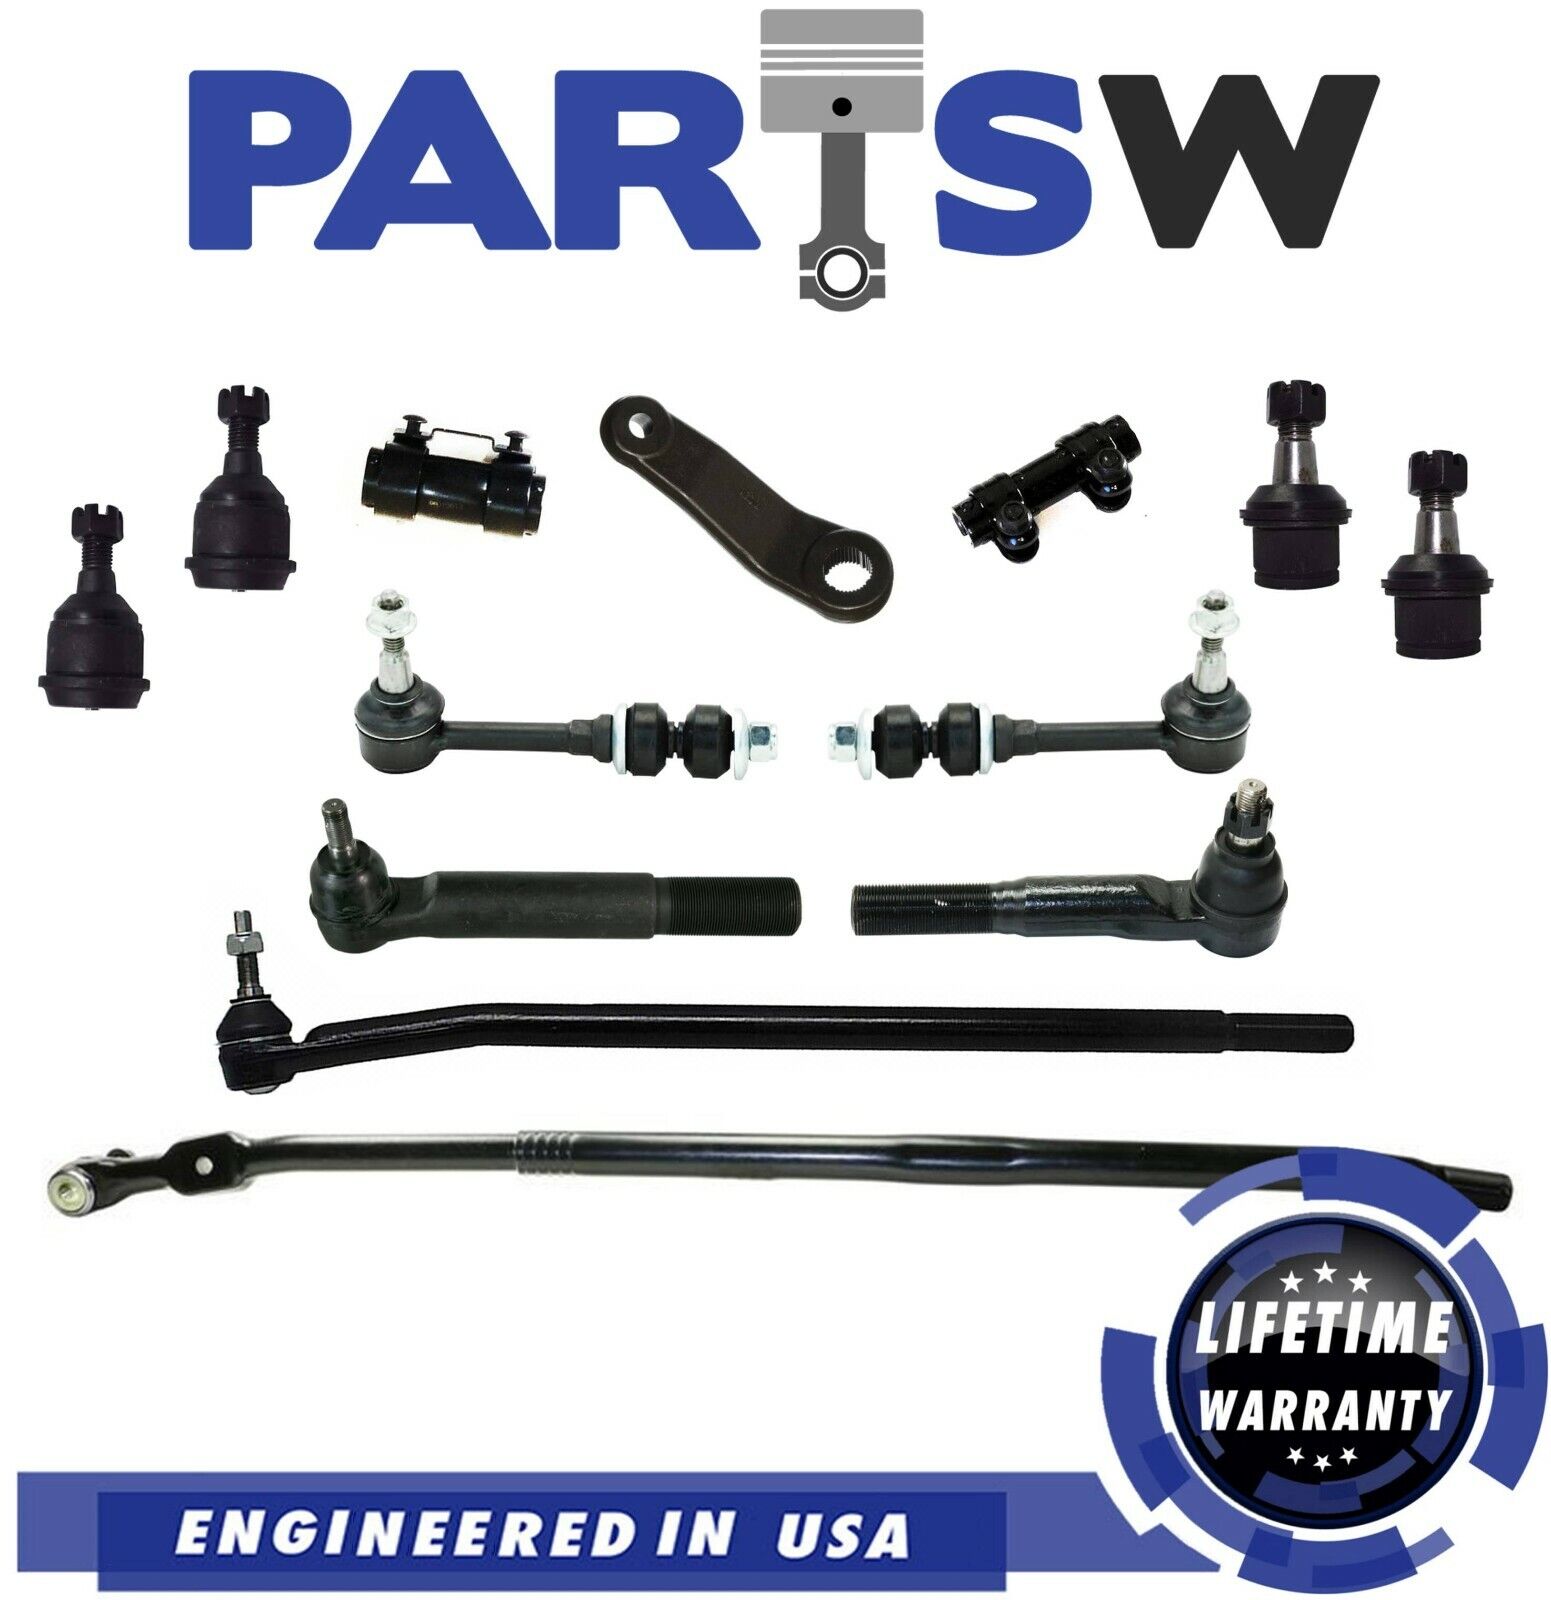 13 Pc Up Lower Ball Joints Tie Rods Sway Bar for Dodge Ram 2500 3500 2003-2005